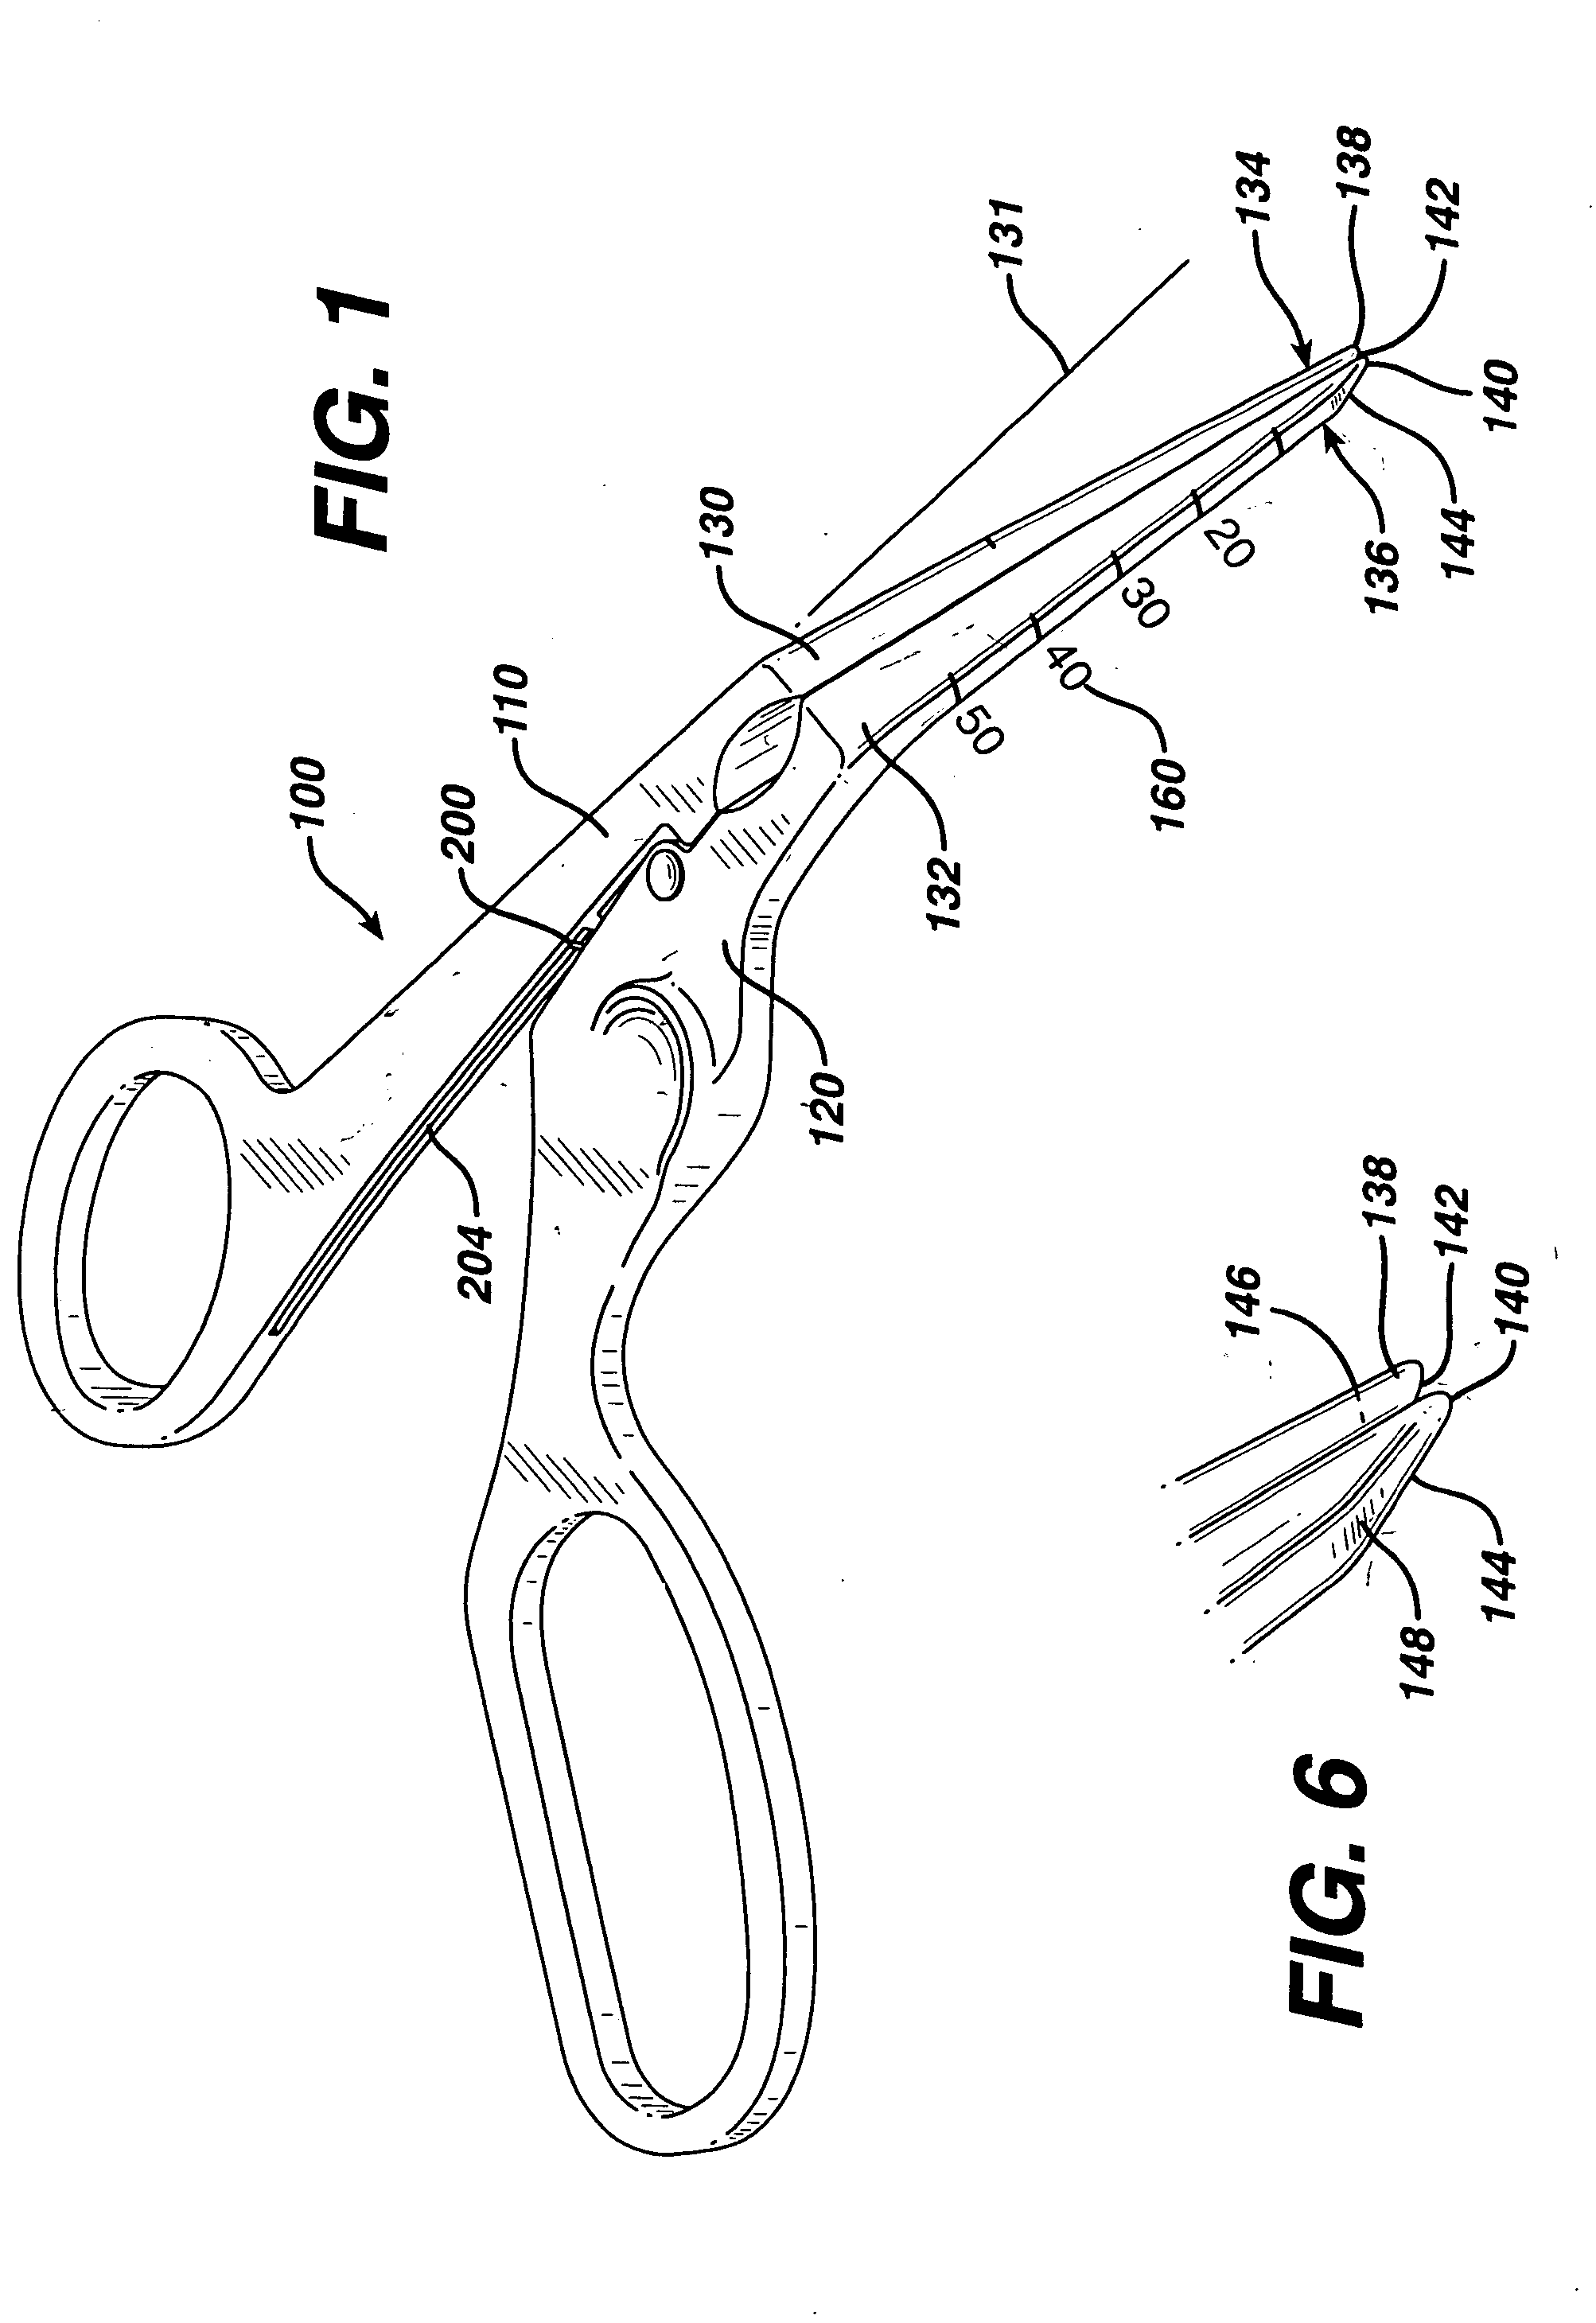 Percutaneous entry system and method